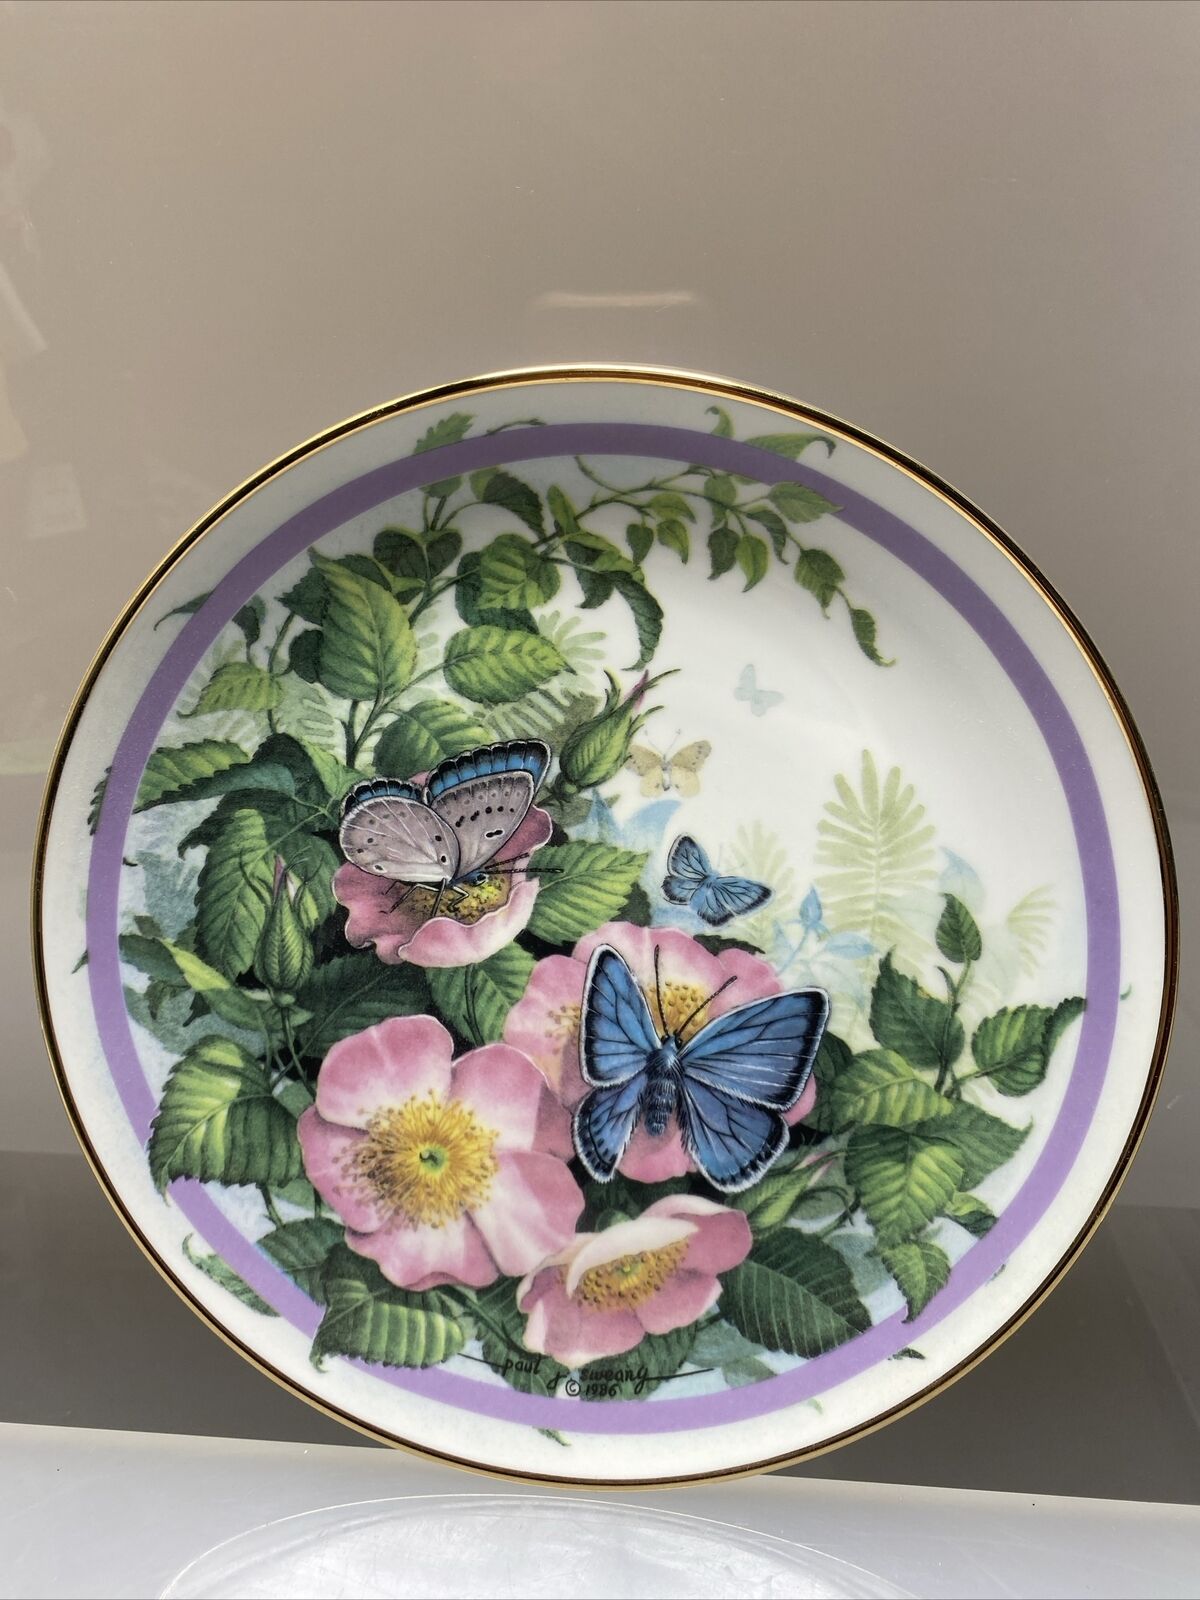 Hamilton Collection Butterfly Garden Plate Common Blue 1986 Paul sweany RARE